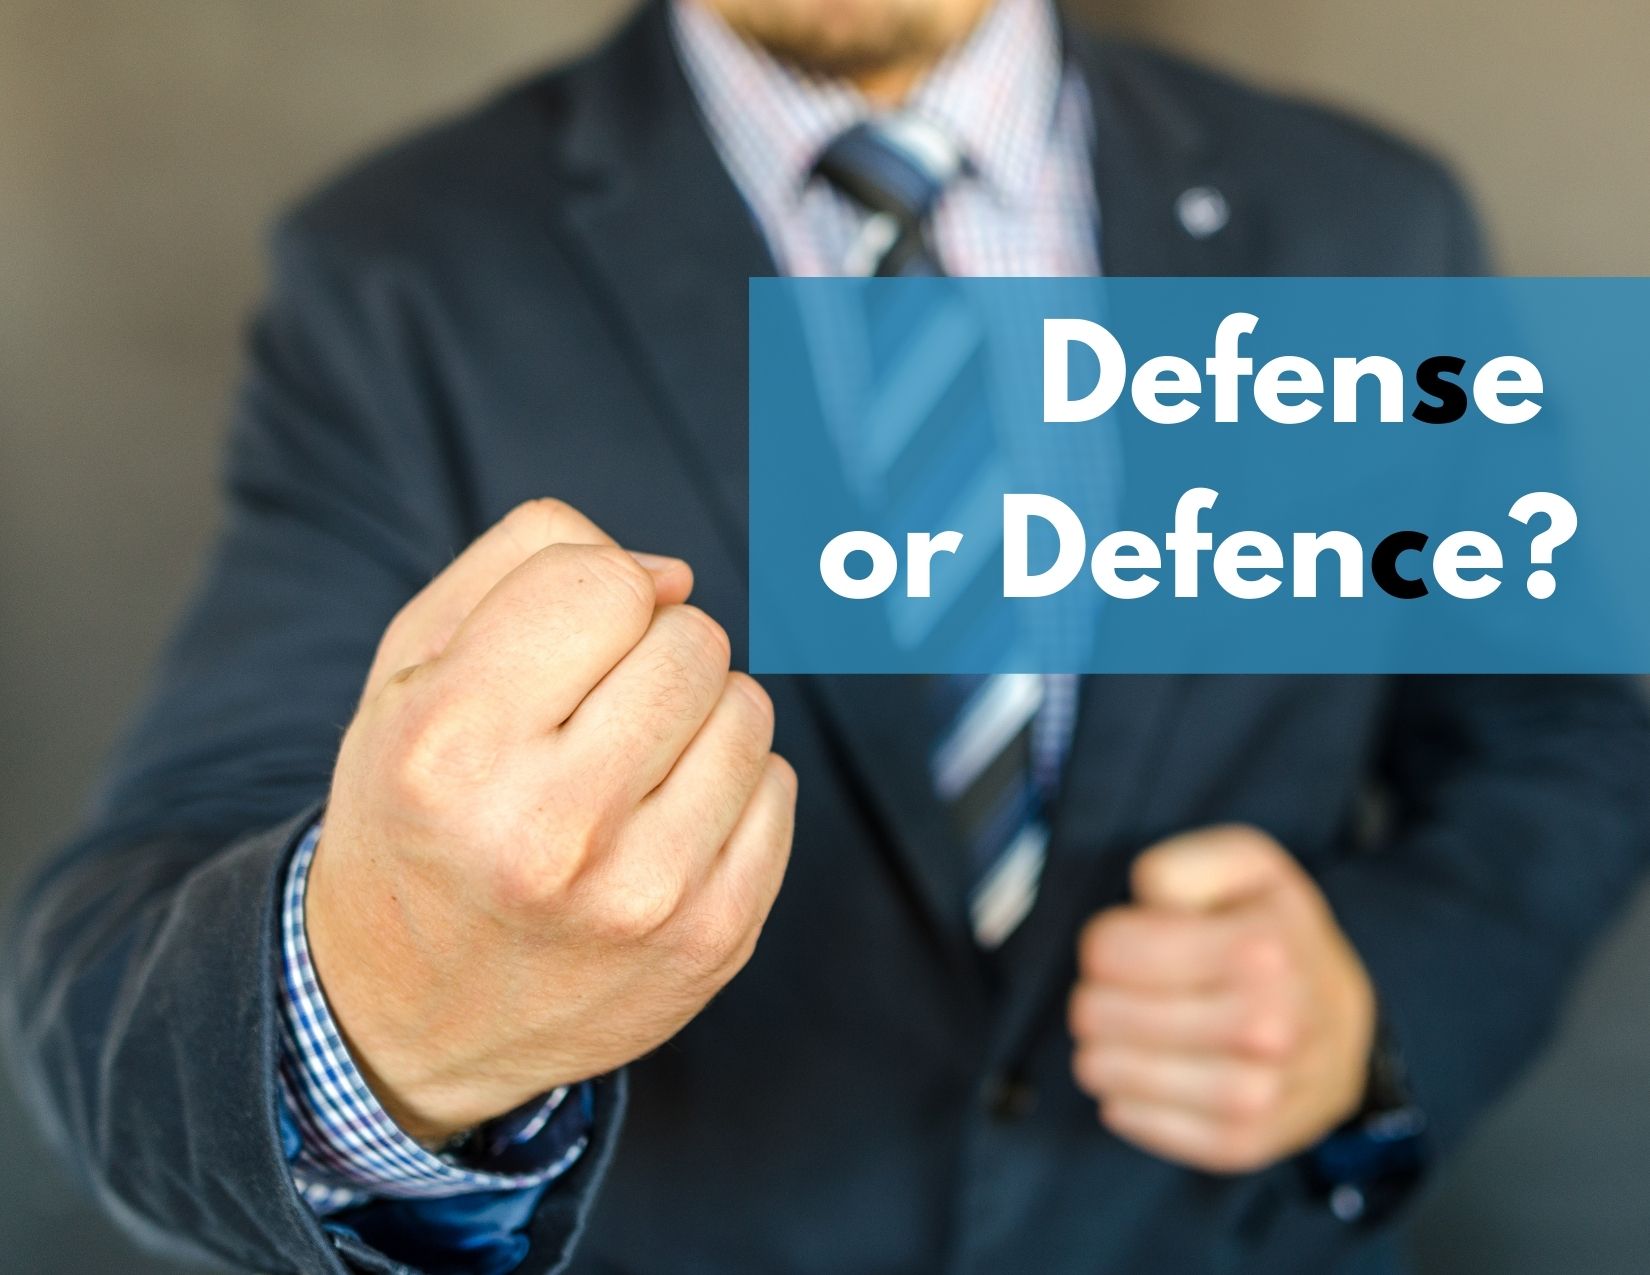 A man with his arms up in defence with the words "Defense or Defence?